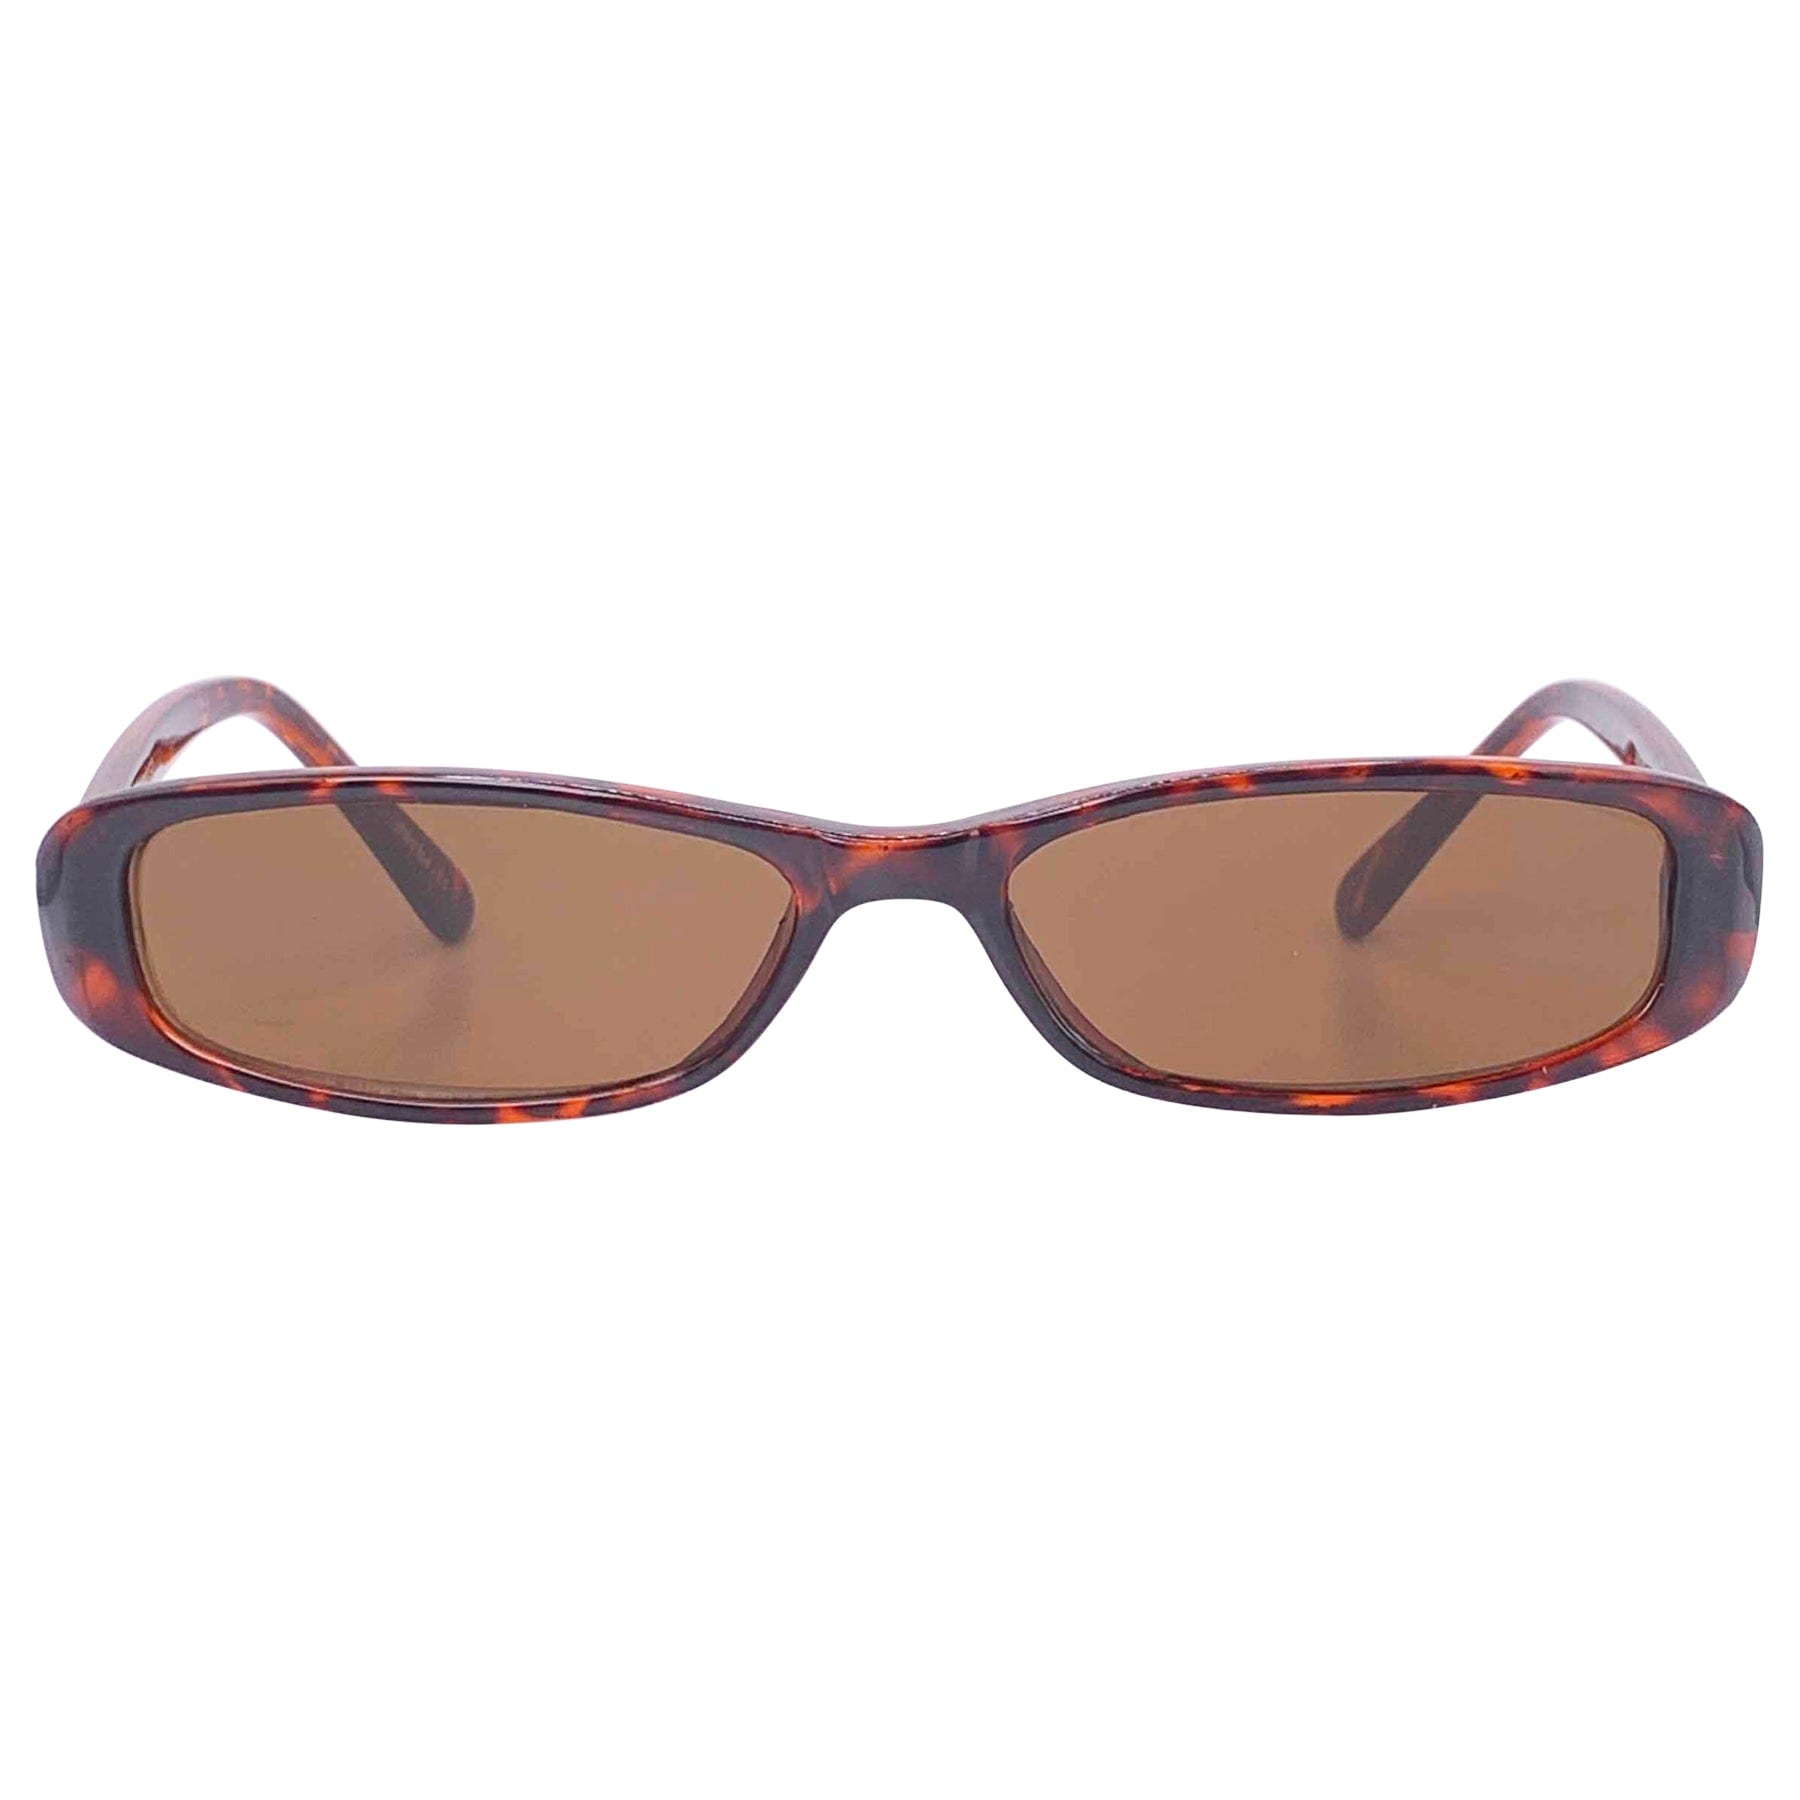 tortoise colorful sunglasses with a brown lens and 90s style frame 